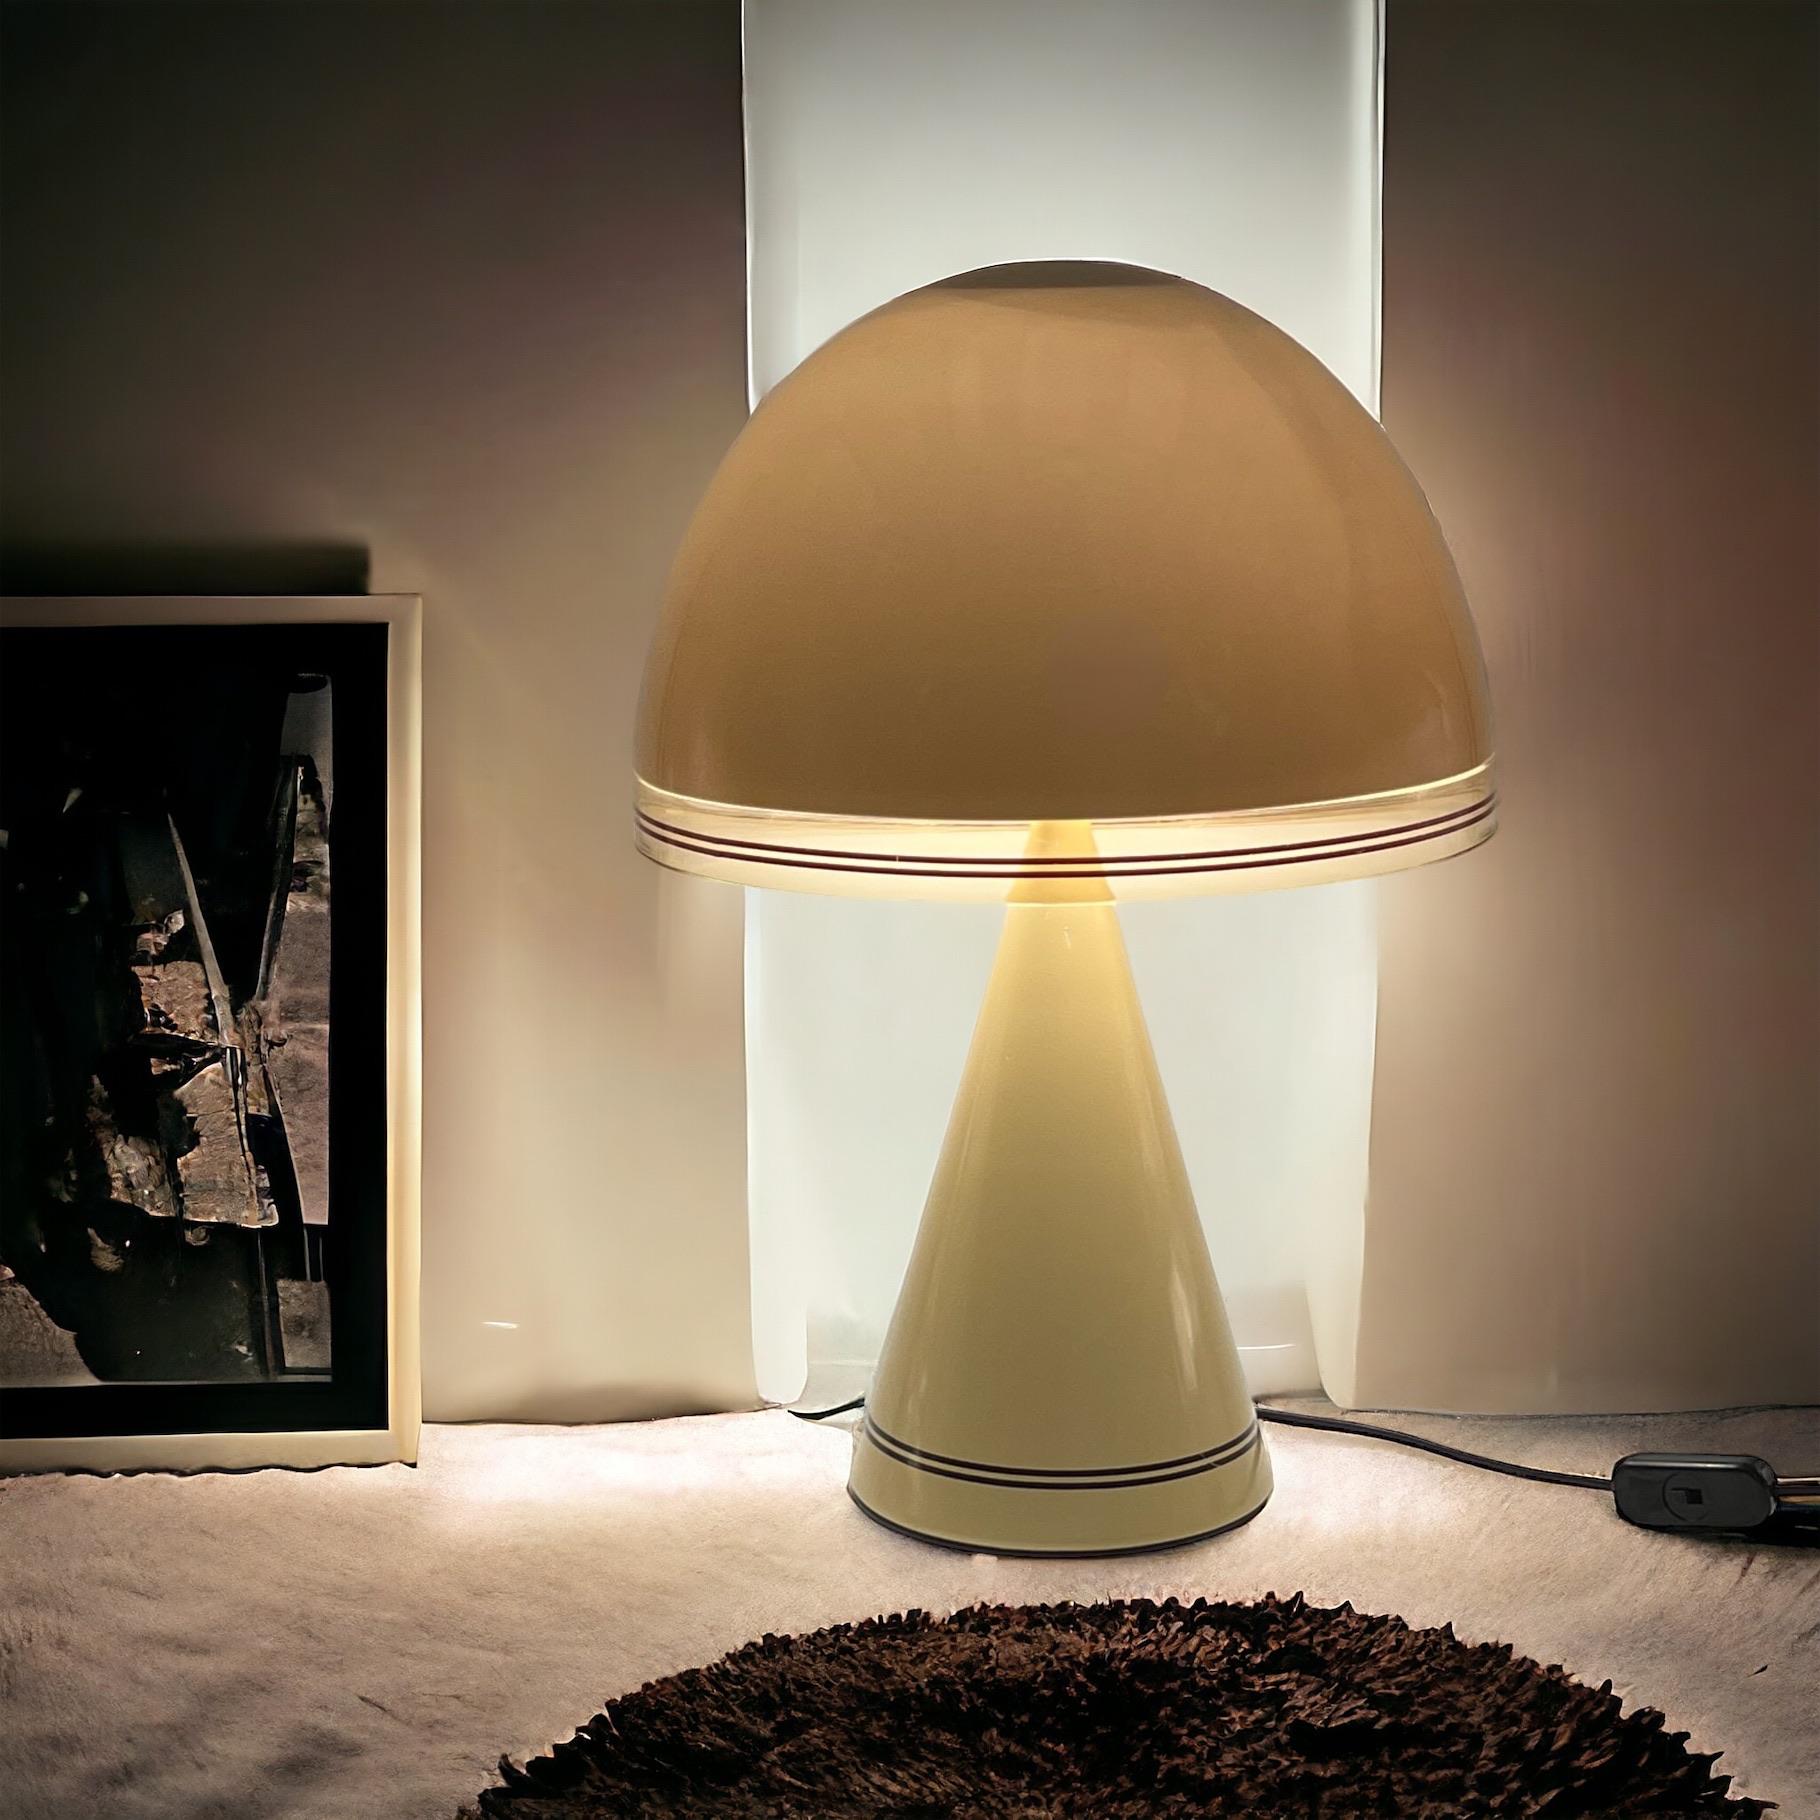 Iconic Mushroom 70s Lamp ‘Baobab’ by iGuzzini - Italian Space Age Iconic Lamp In Good Condition For Sale In San Benedetto Del Tronto, IT